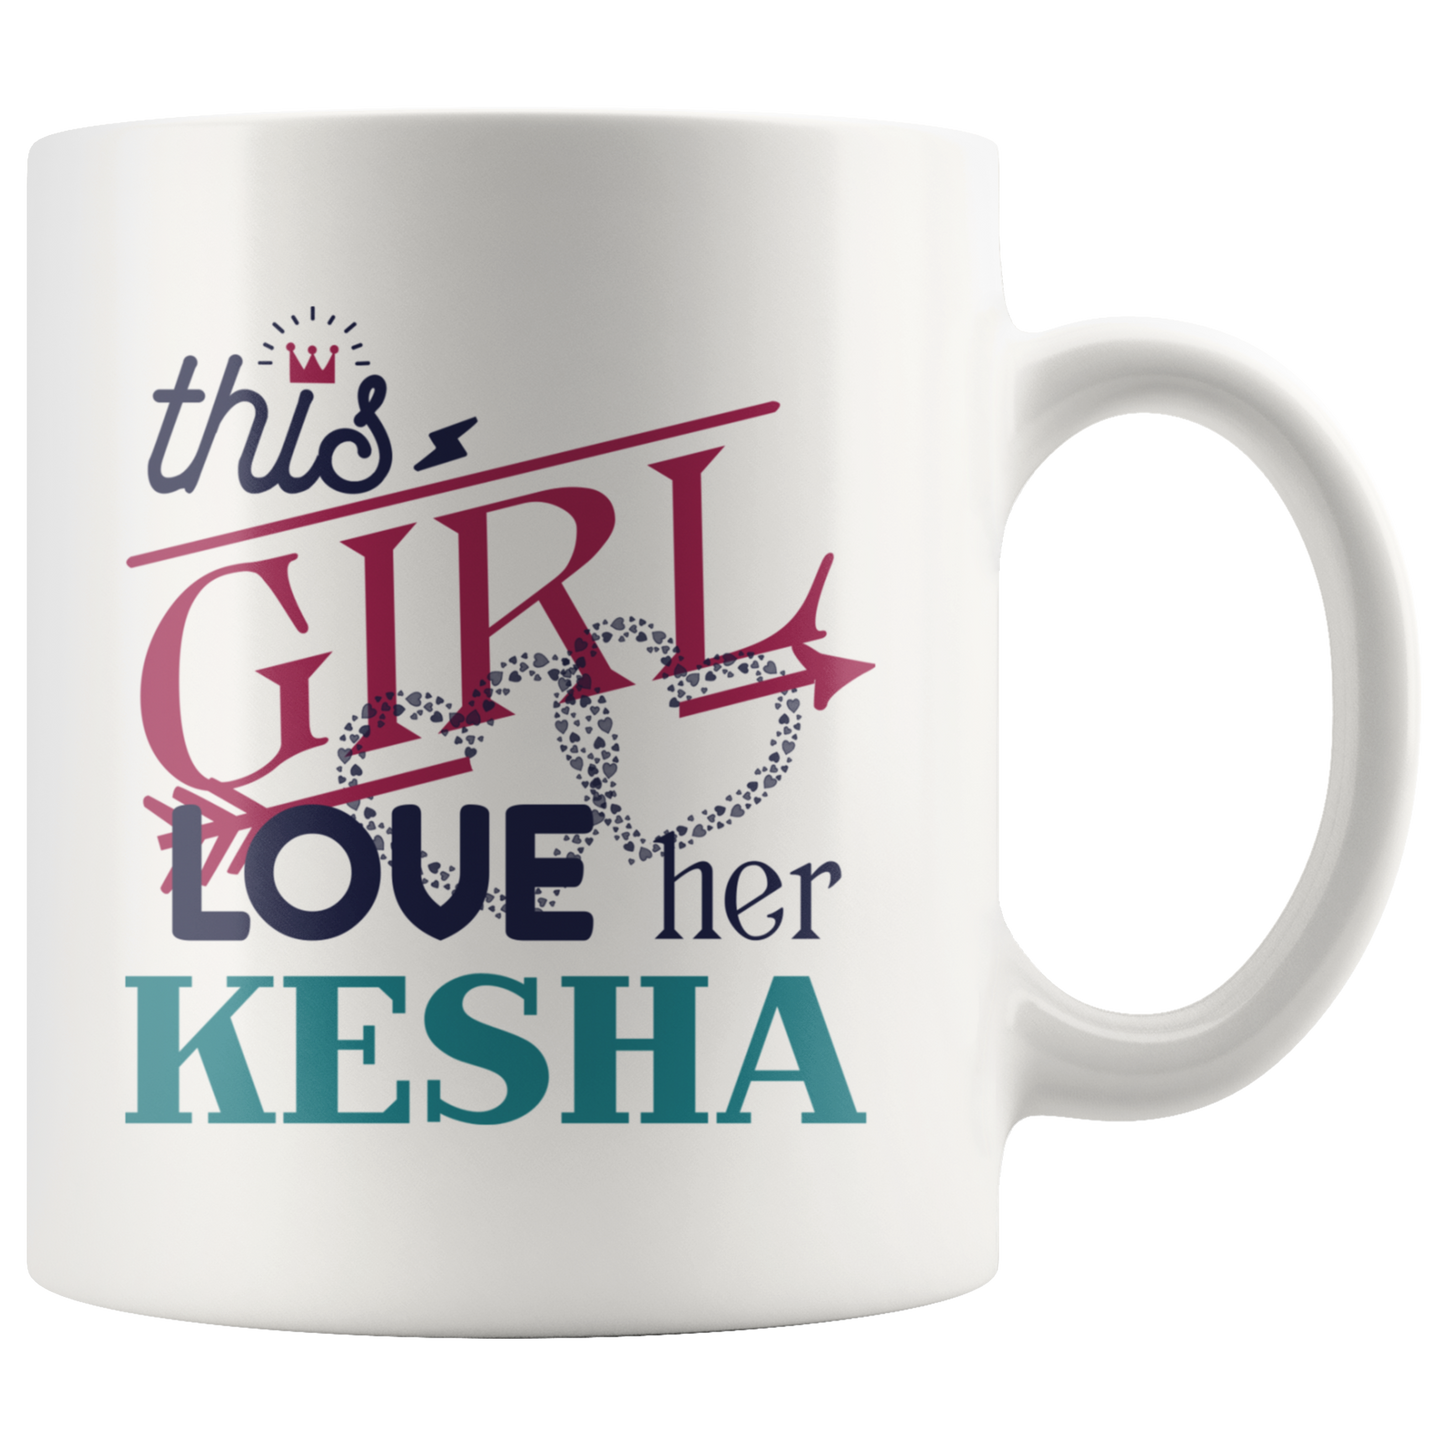 ND20379378-sp-19175 - Funny Mug Gifts For Her, Wife - This Girl Love Her Husband K